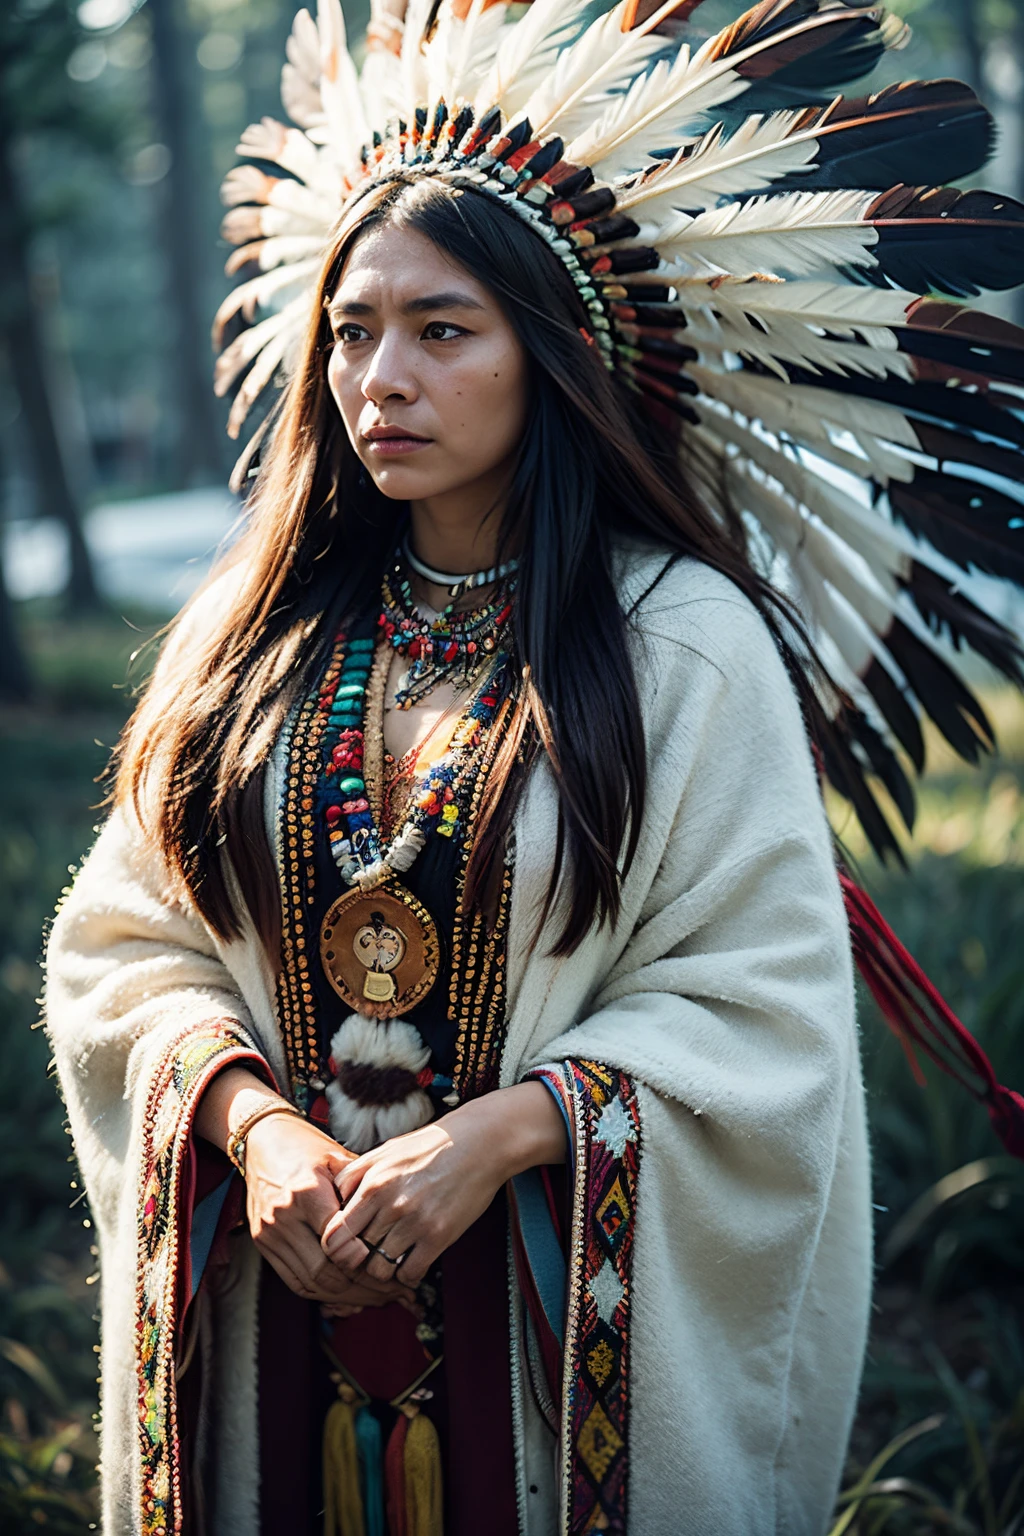 8k, highest quality, ultra details, North American indigenous woman, traditional Native American regalia, intricate beadwork, feathered headdress, strong and stoic expression, deep connection to the land